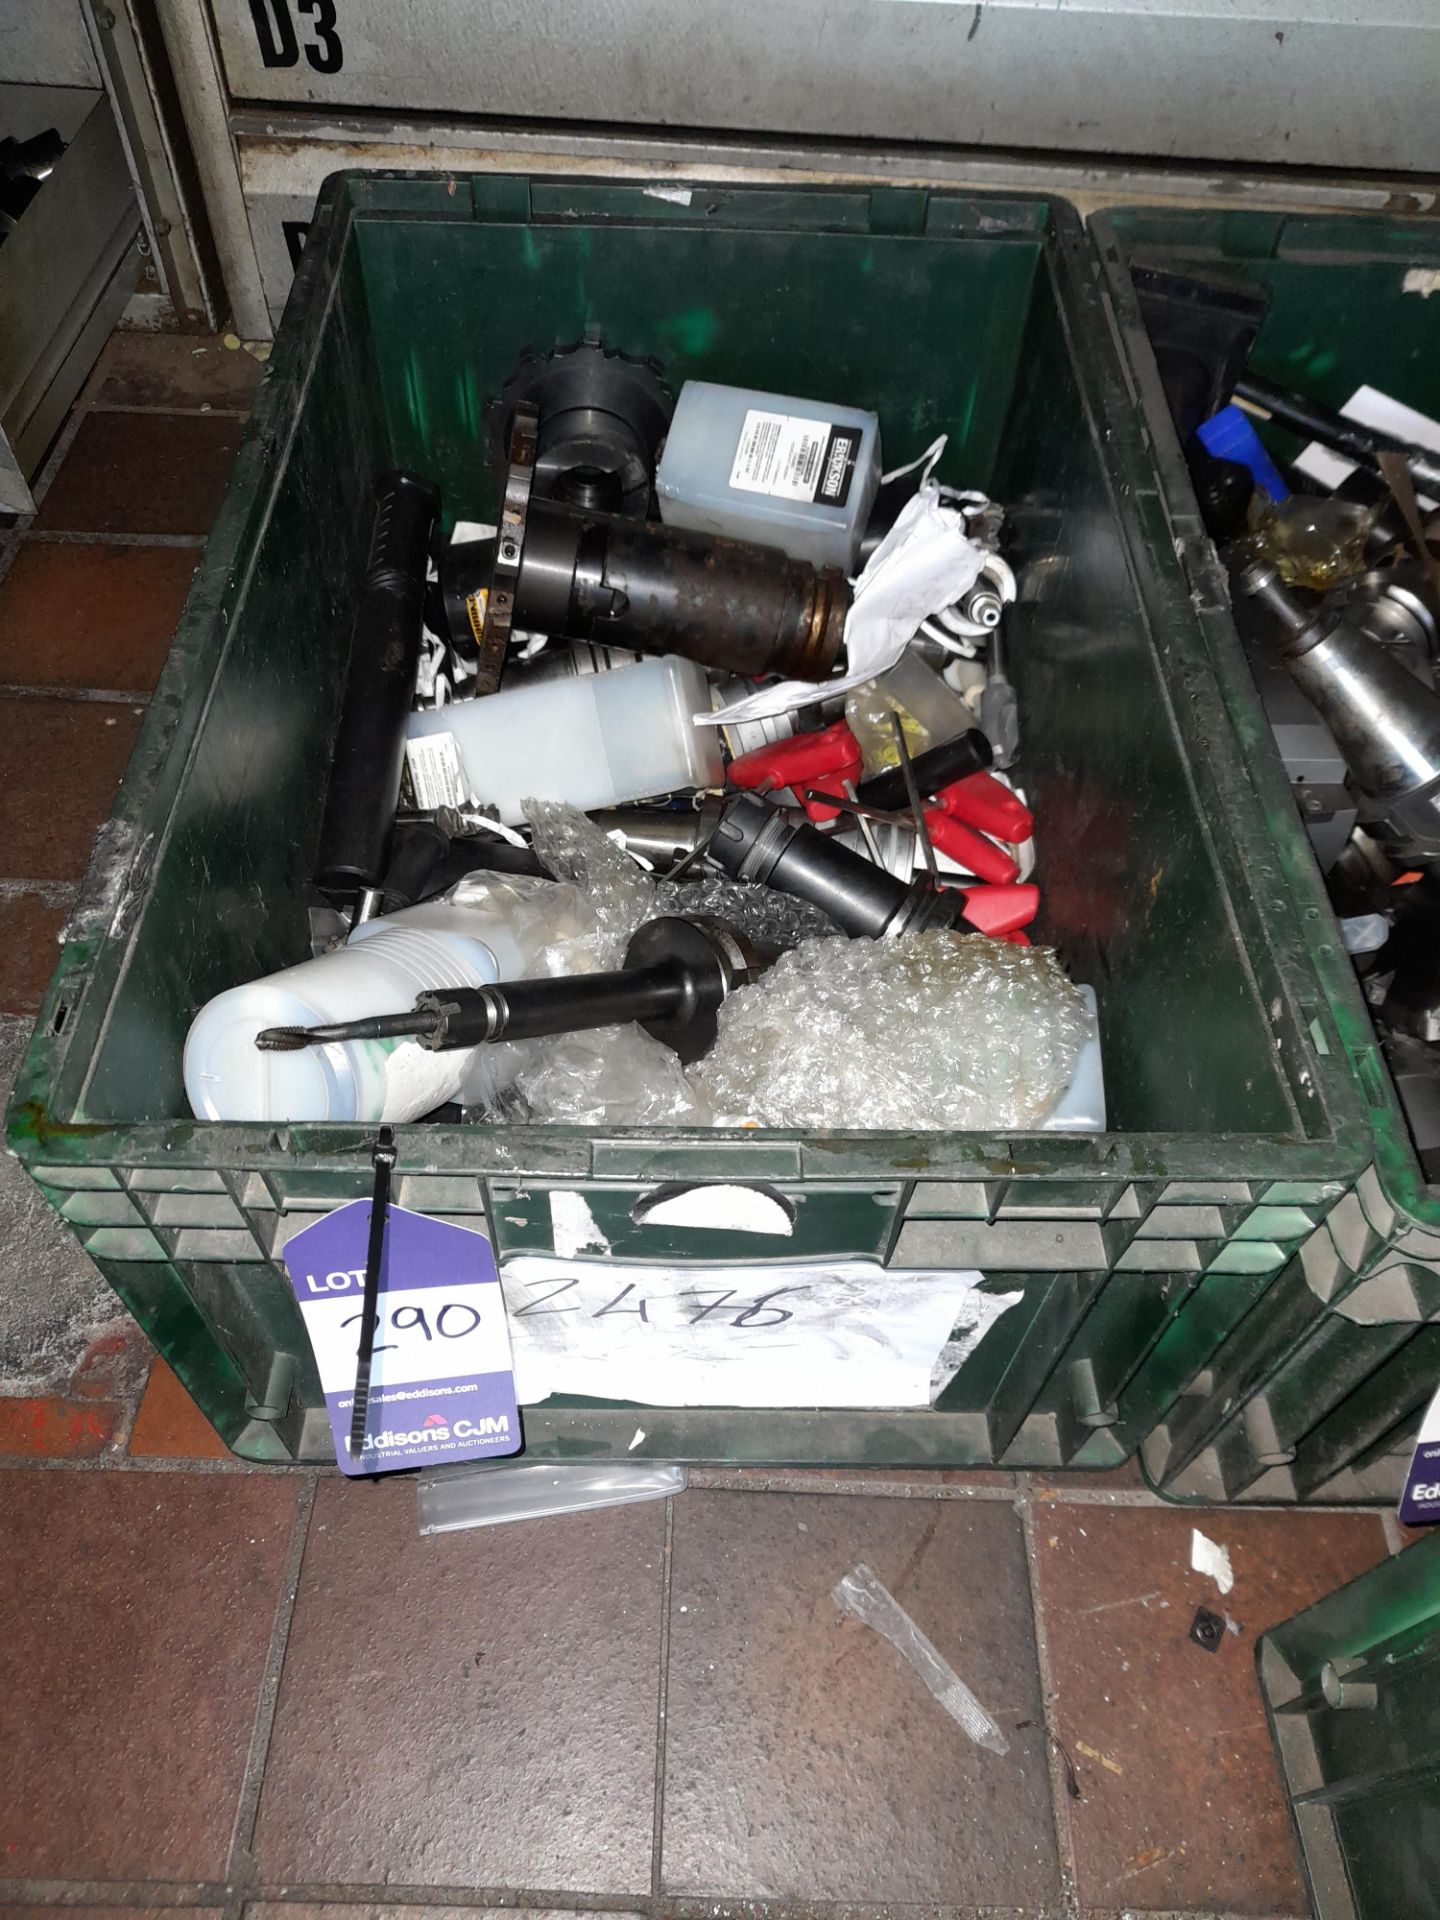 Contents to crate to include various CNC toolholders, cutters, etc